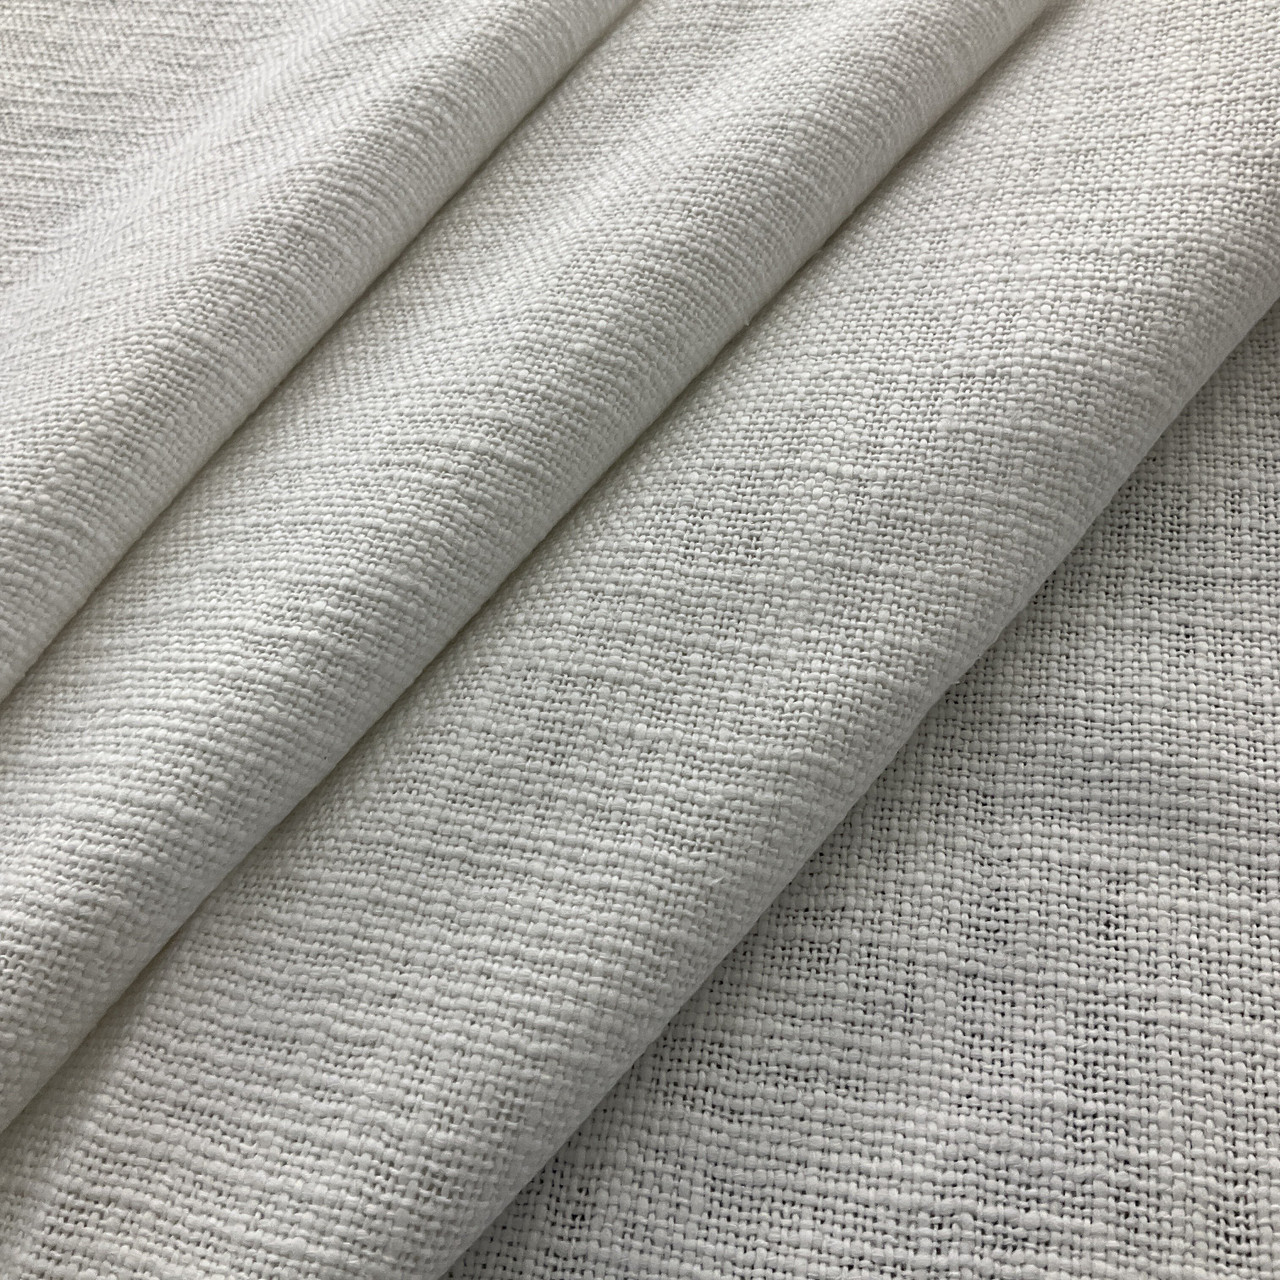 Number One Textiles Solid Slub Cotton Woven White, Medium Weight Woven  Fabric, Home Decor Fabric